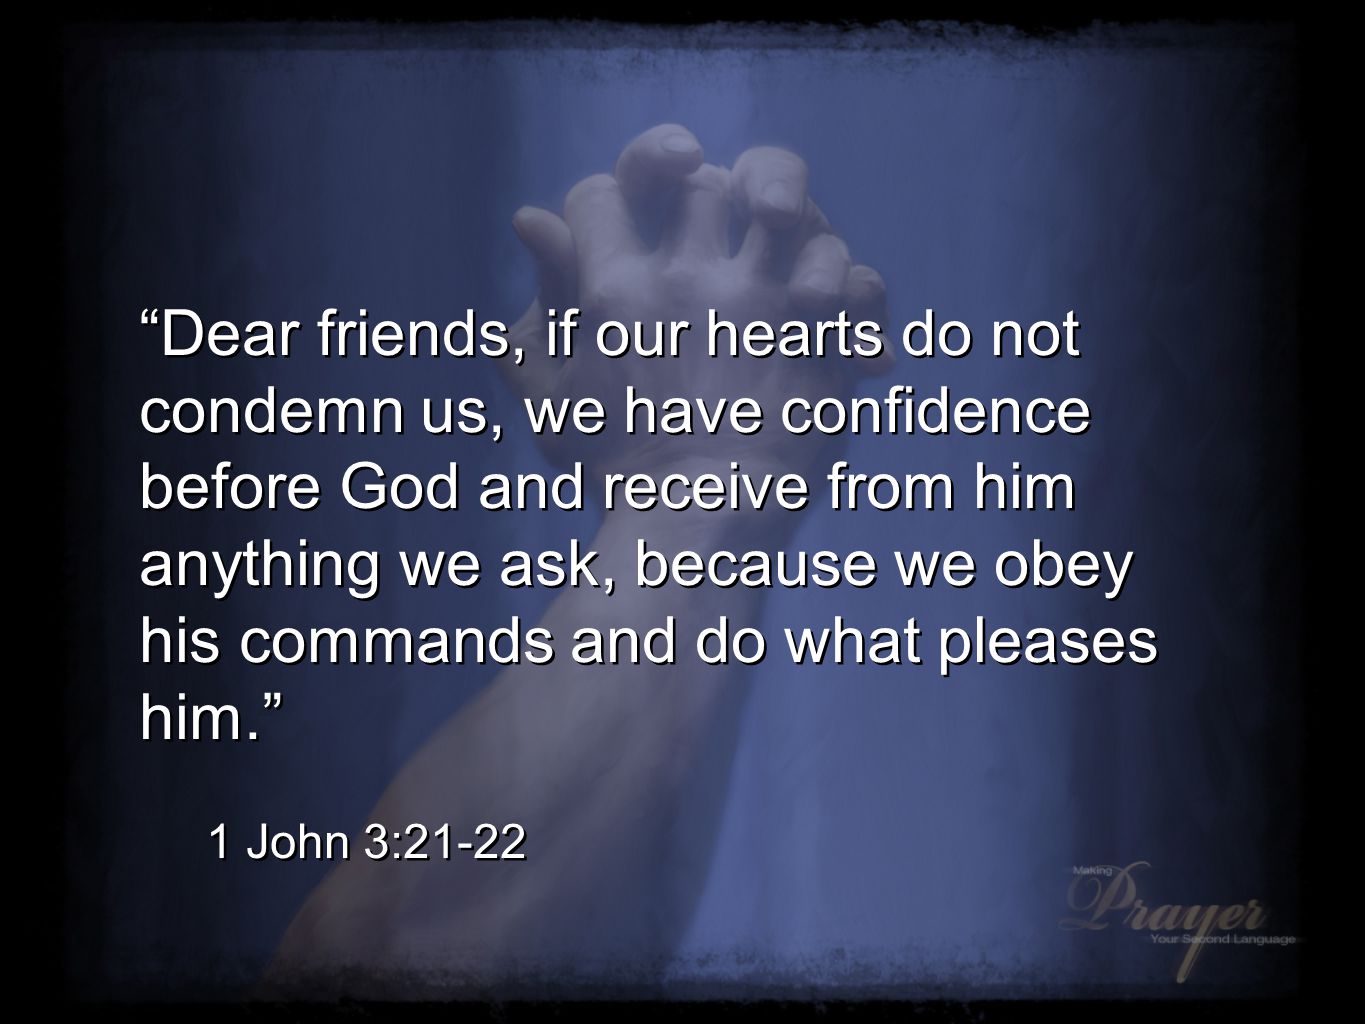 Dear friends, if our hearts do not condemn us, we have confidence before God and receive from him anything we ask, because we obey his commands and do what pleases him. 1 John 3:21-22 Dear friends, if our hearts do not condemn us, we have confidence before God and receive from him anything we ask, because we obey his commands and do what pleases him. 1 John 3:21-22